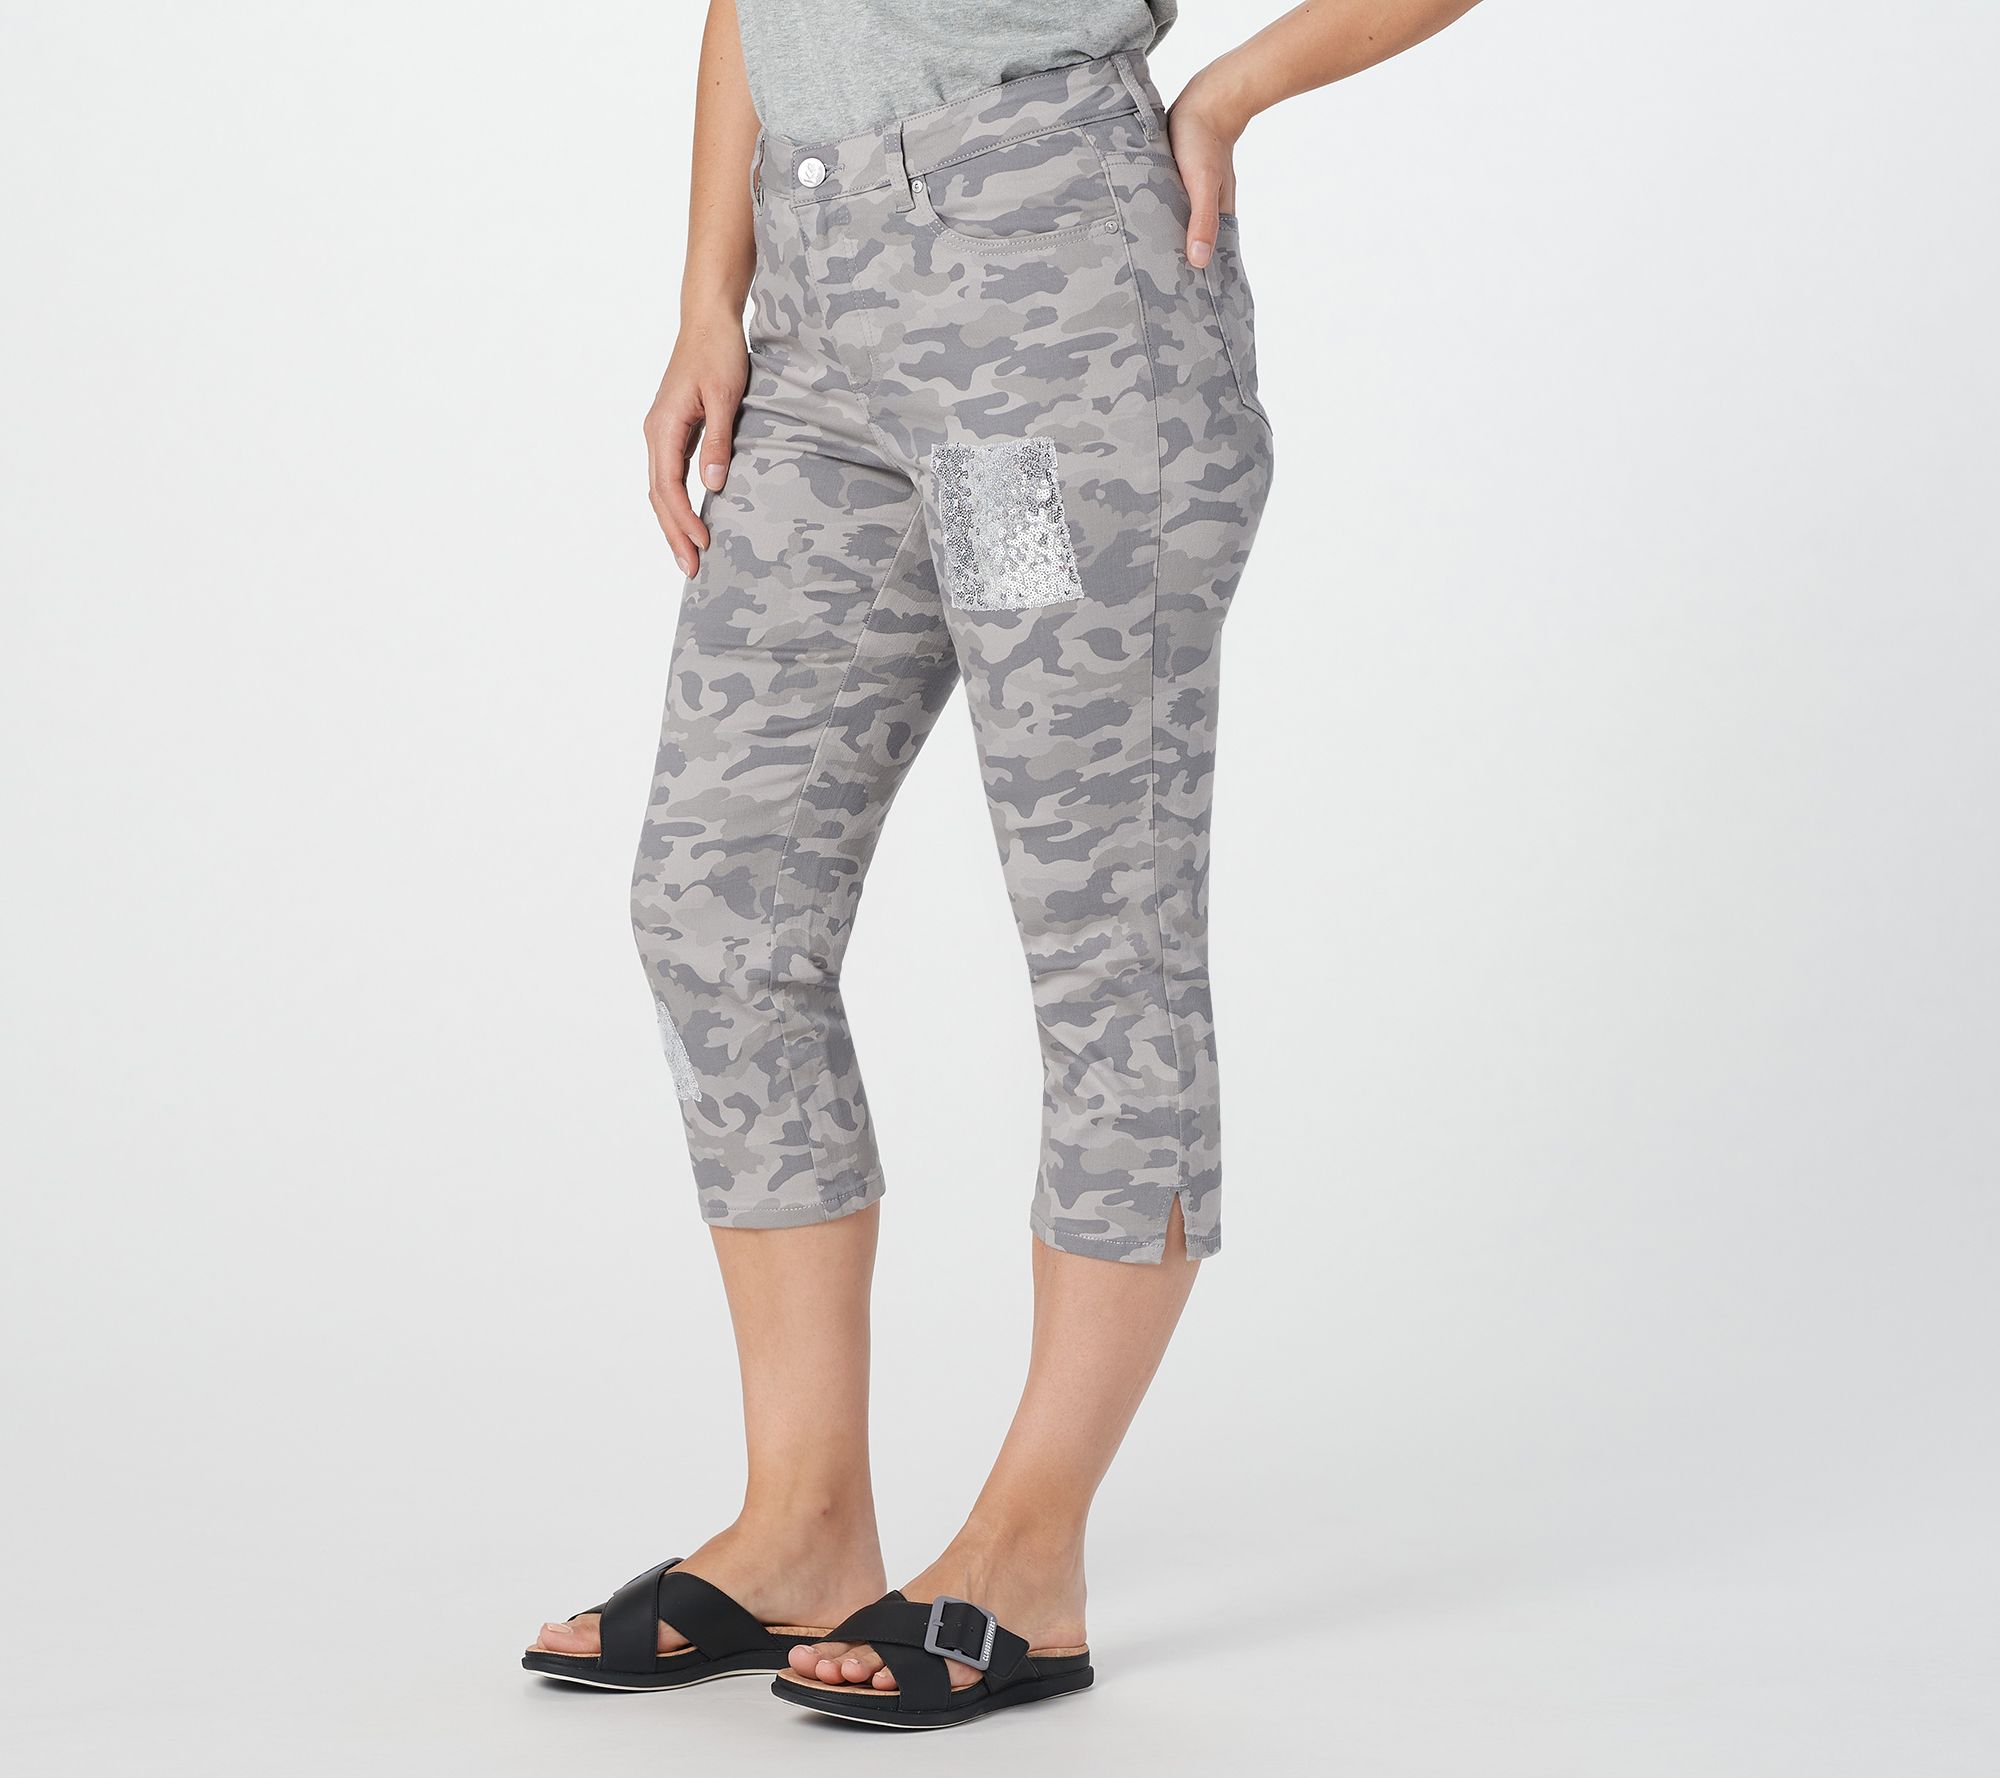 Belle by Kim Gravel TripleLuxe Twill Camo Printed Capris 